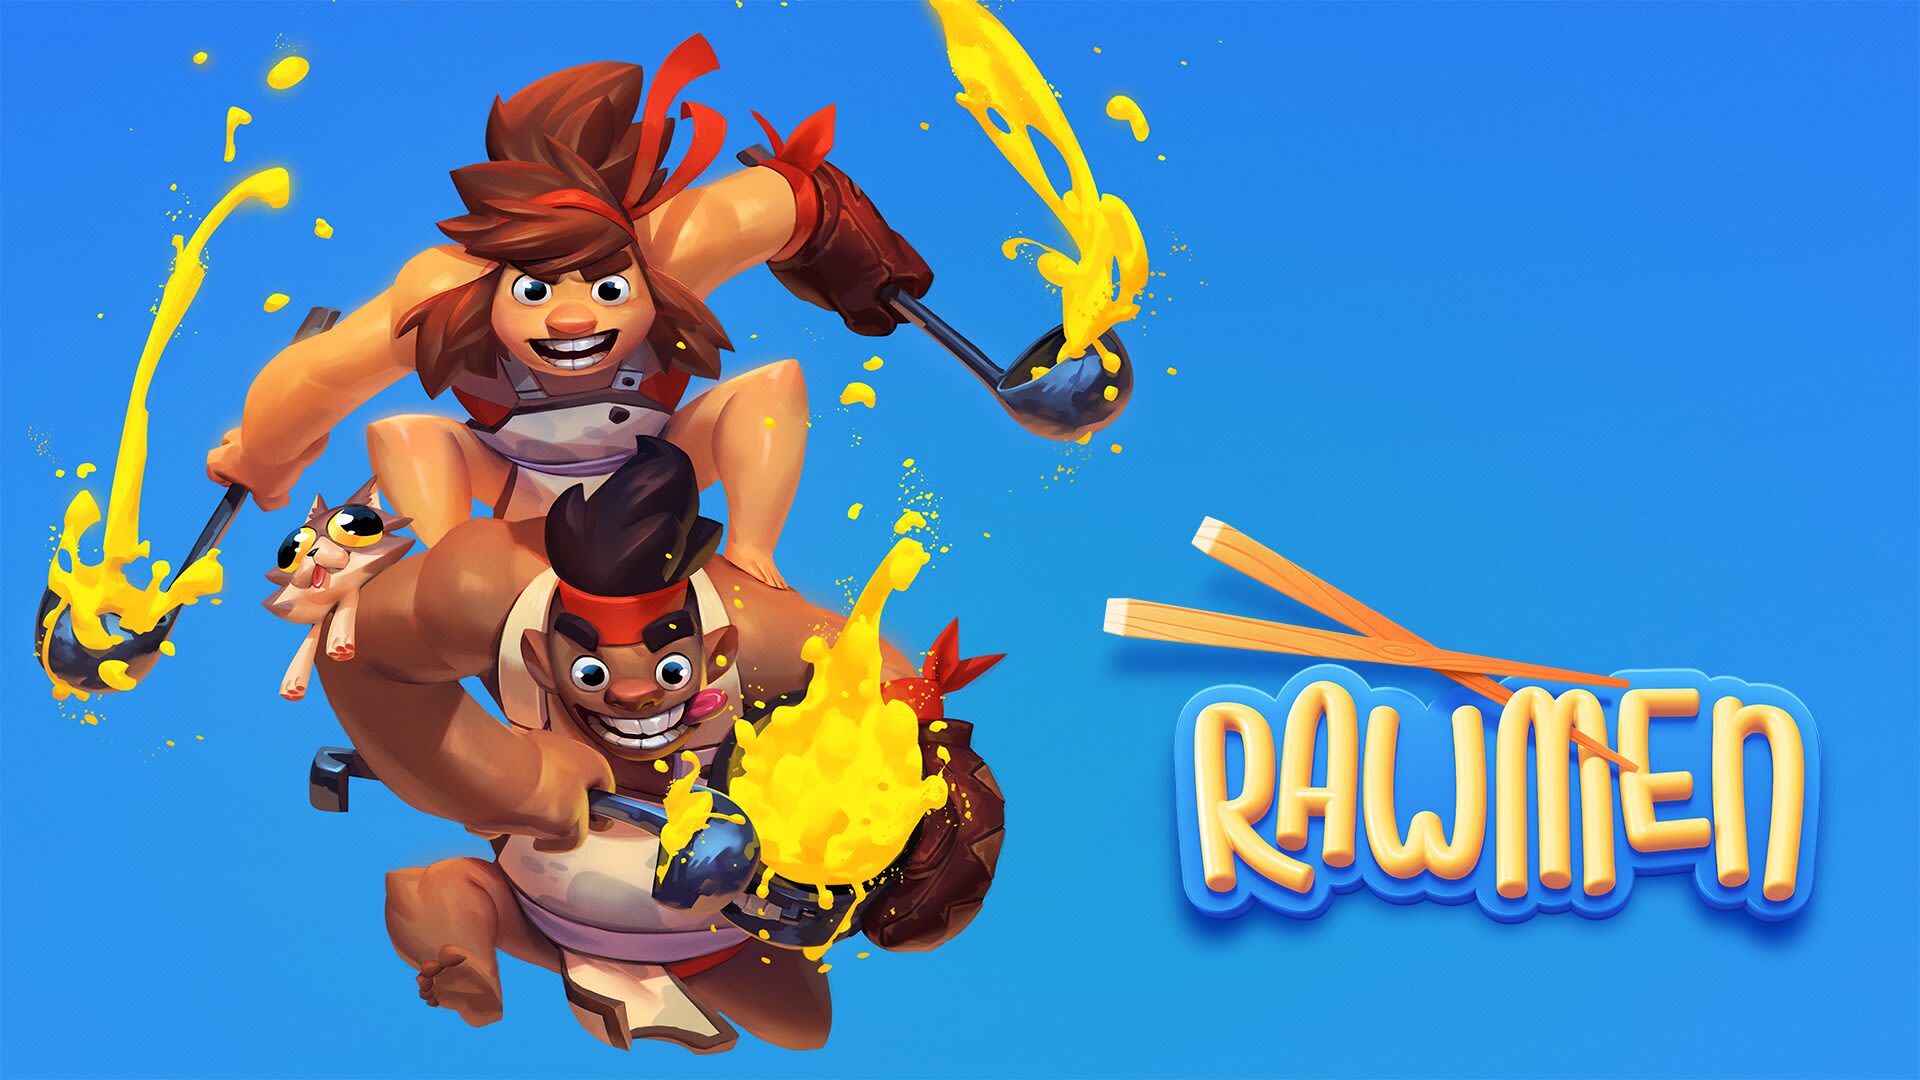 RAWMEN for PC launches as free-to-play title on July 23